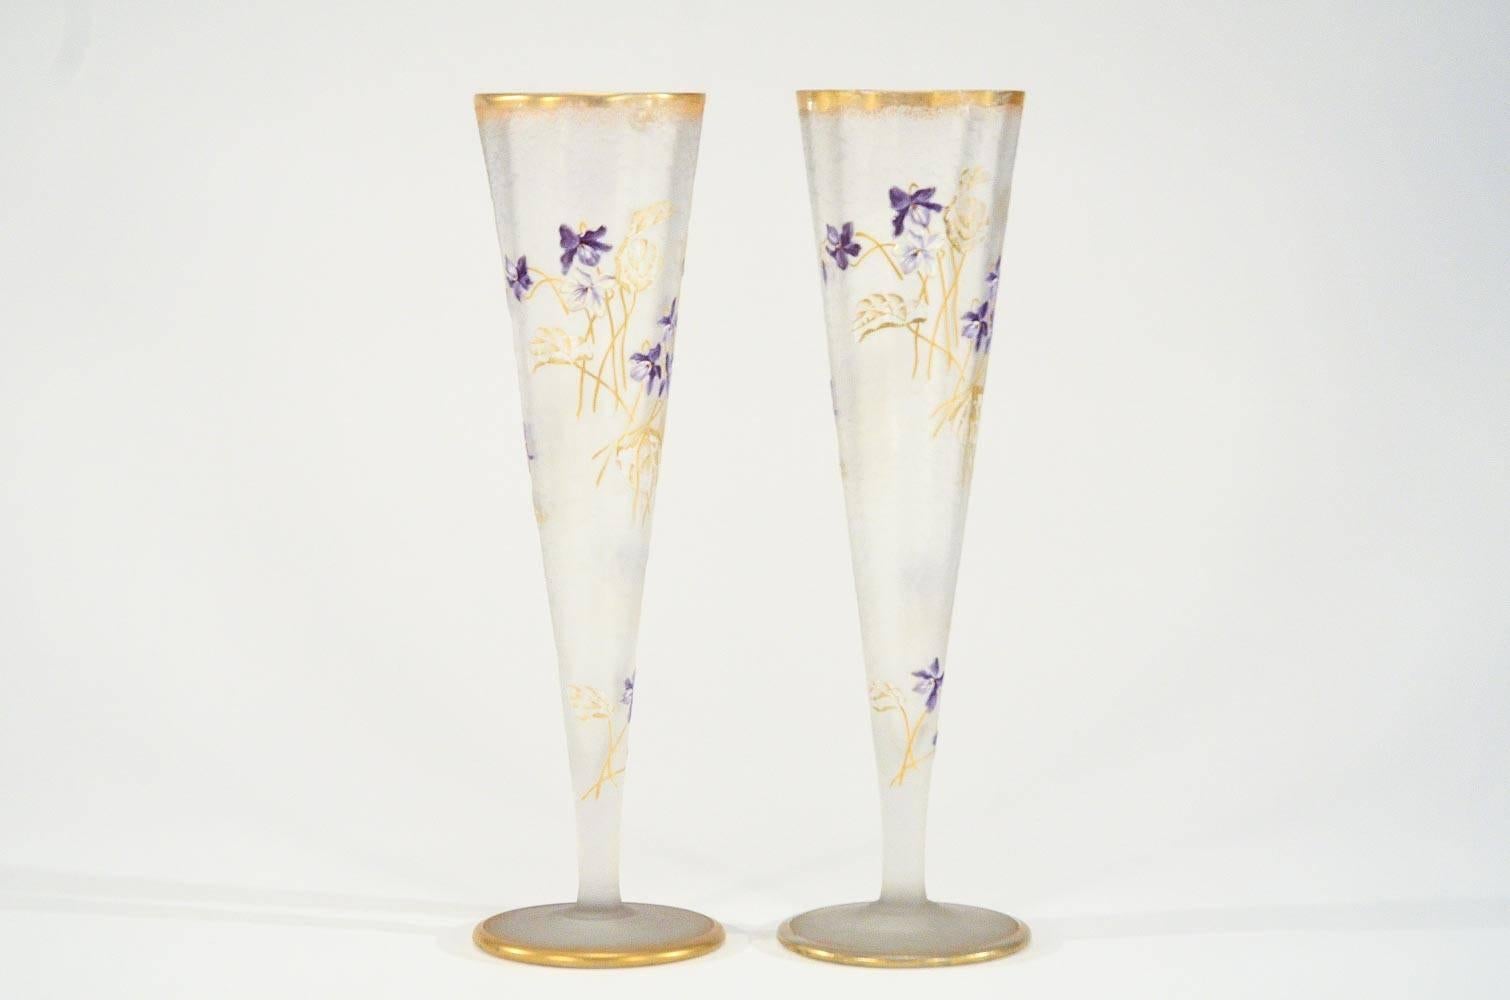 This closely matched pair of Art Nouveau Art Glass vases was made by the French Glass Company, Mt. Joye ca.1890-1900. Standing 15